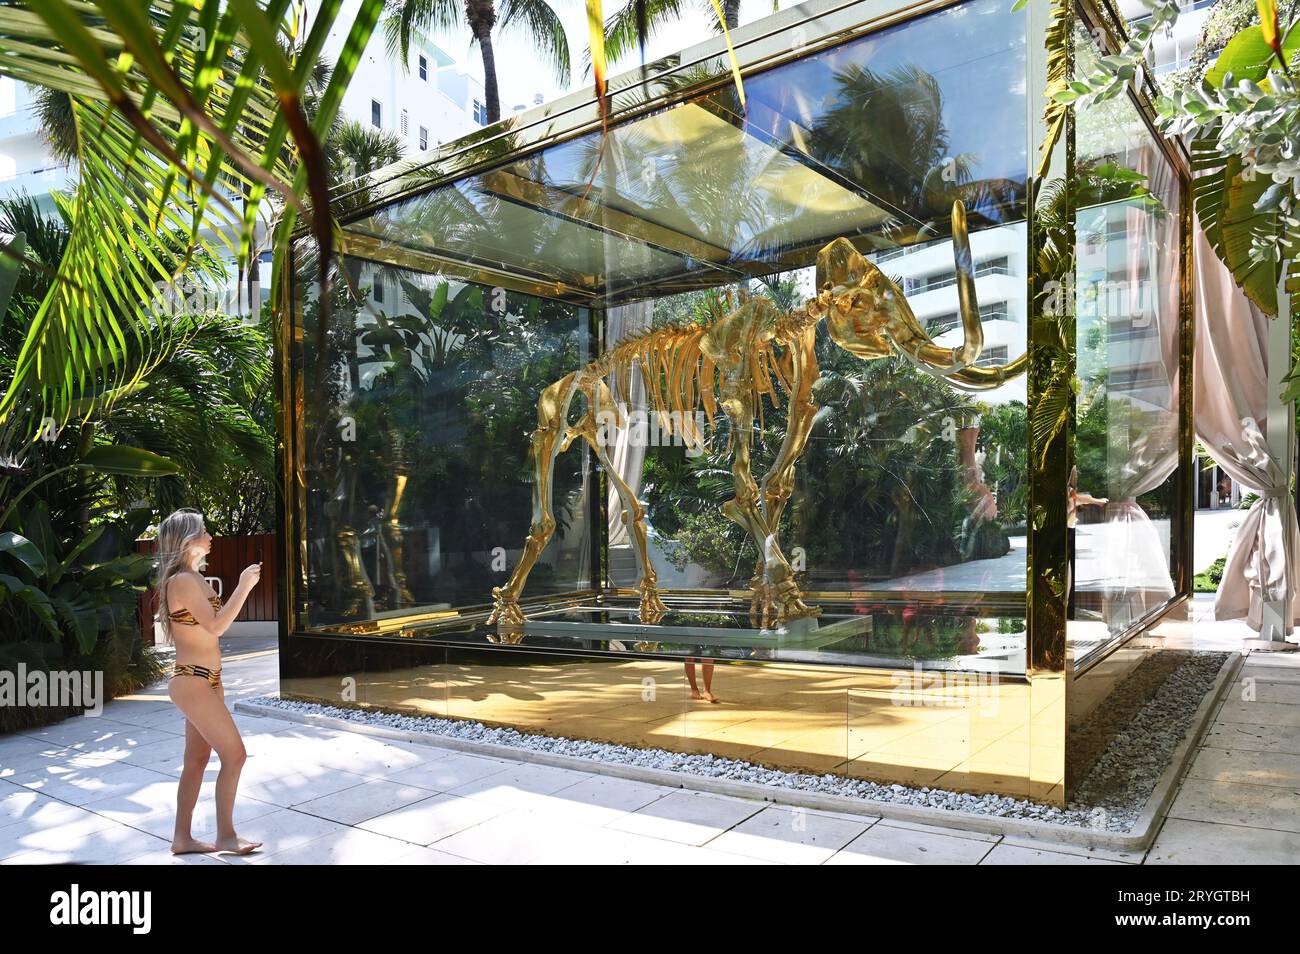 USA. FLORIDA. MIAMI. THE GOLDEN MAMMOUTH PF THE ARTIST DAMIEN HIRST AT THE FAENA HOTEL. Stock Photo